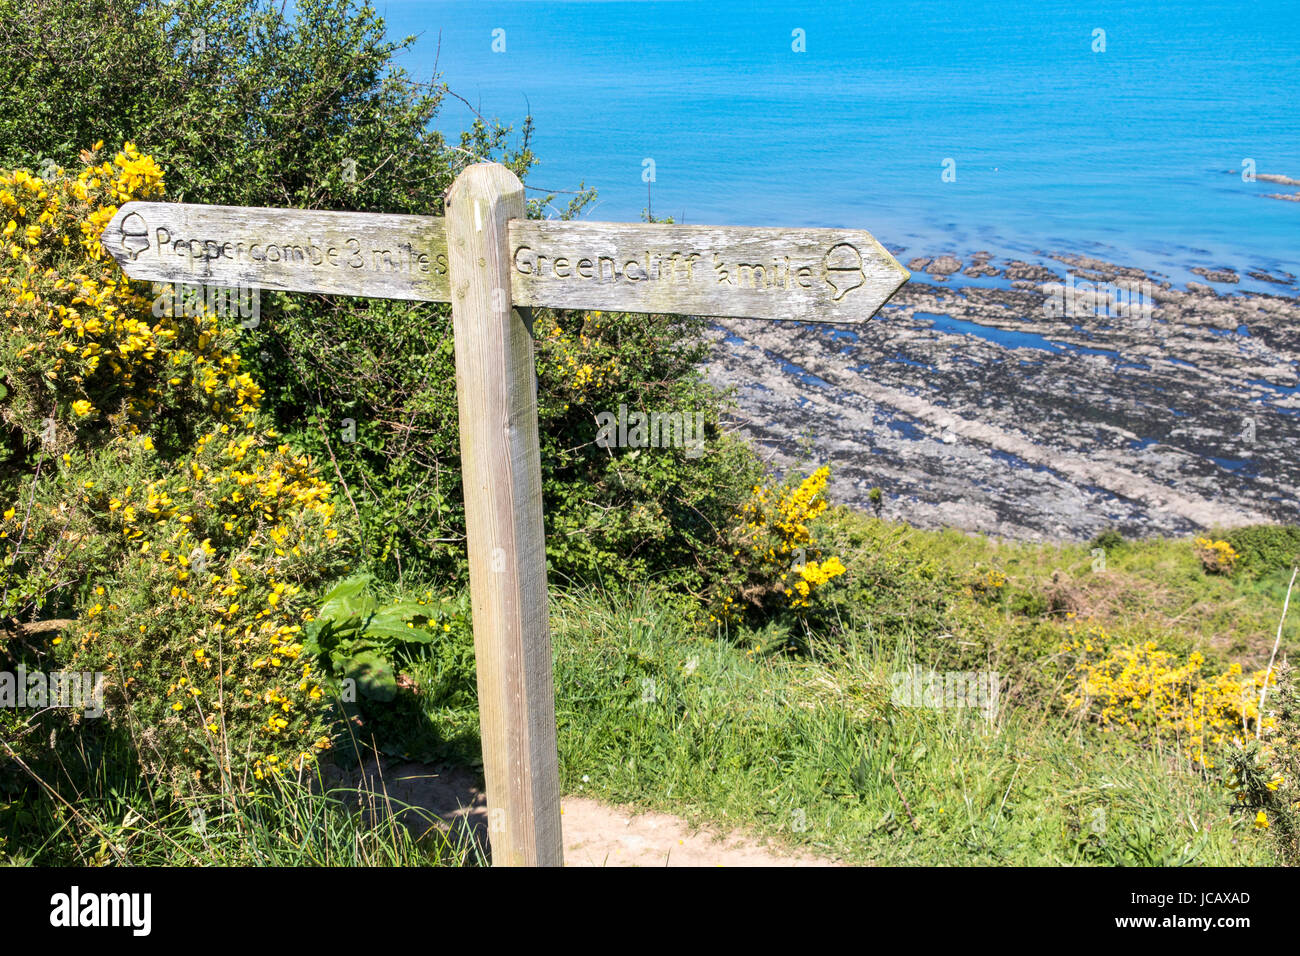 Wooden Signpost to Peppercombe and Greencliff on the South West Coast Path, Greencliff Devon, UK. Stock Photo